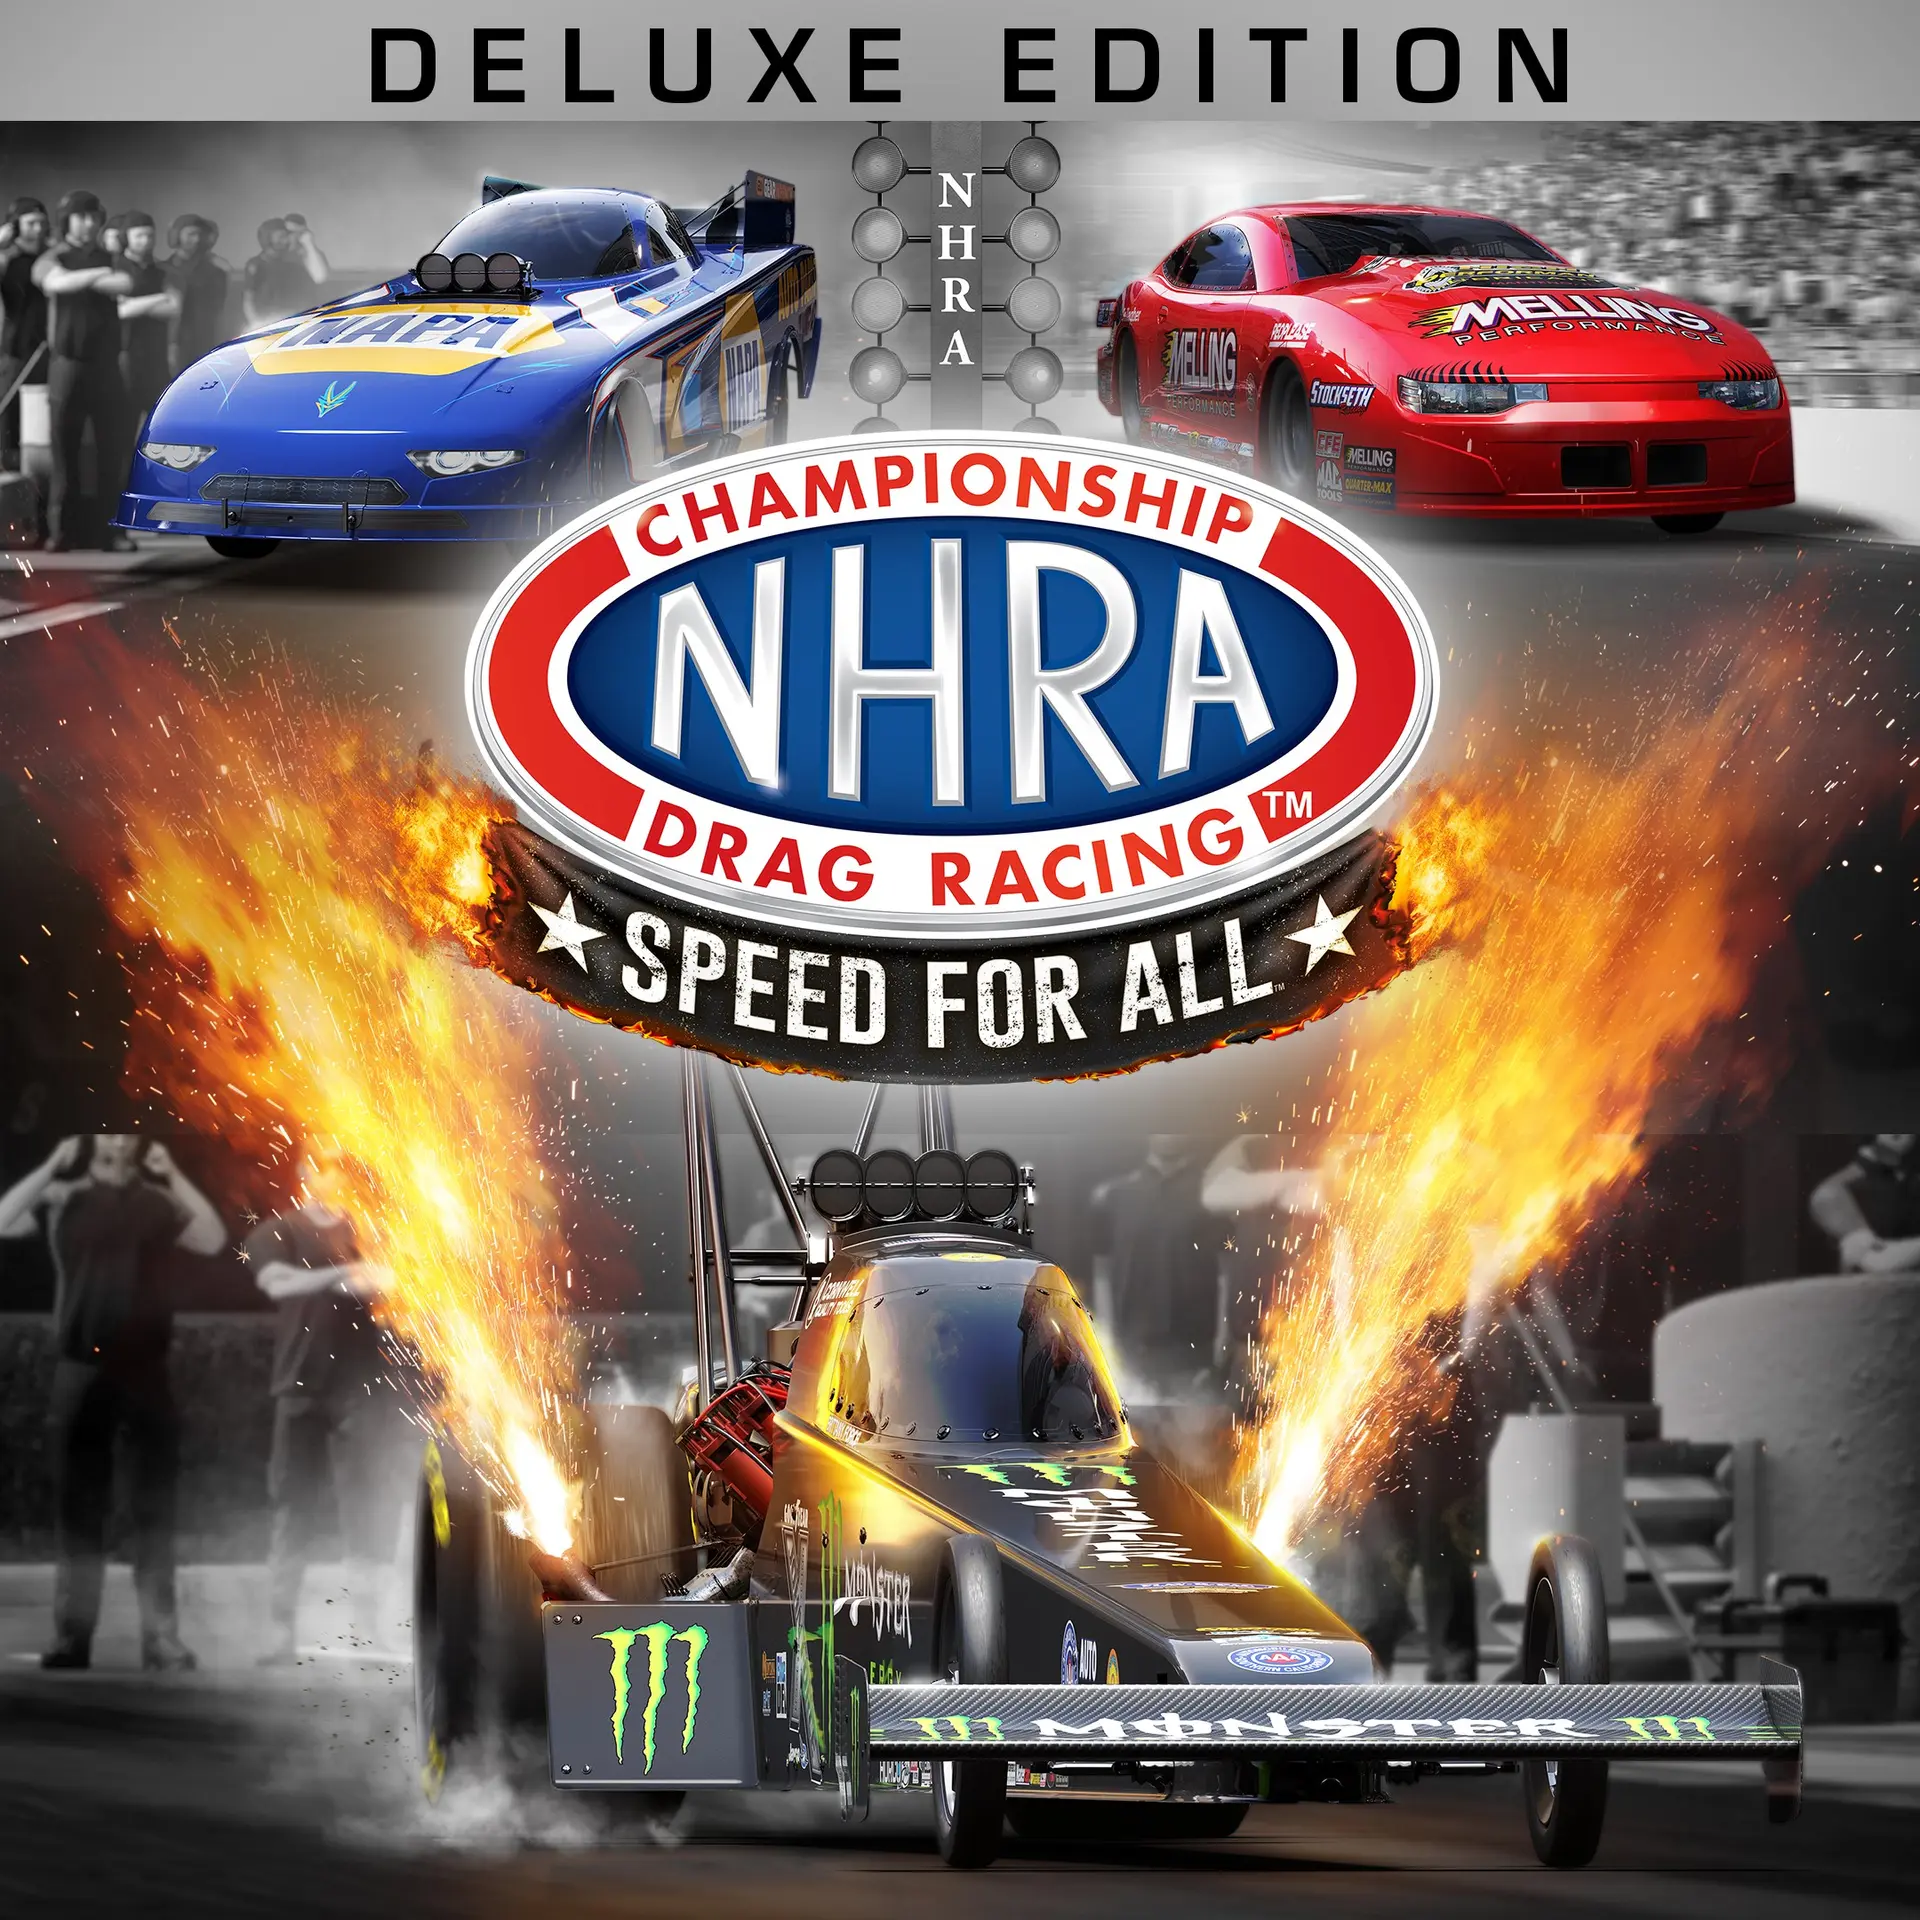 NHRA Championship Drag Racing: Speed for All - Deluxe Edition (XBOX One - Cheapest Store)